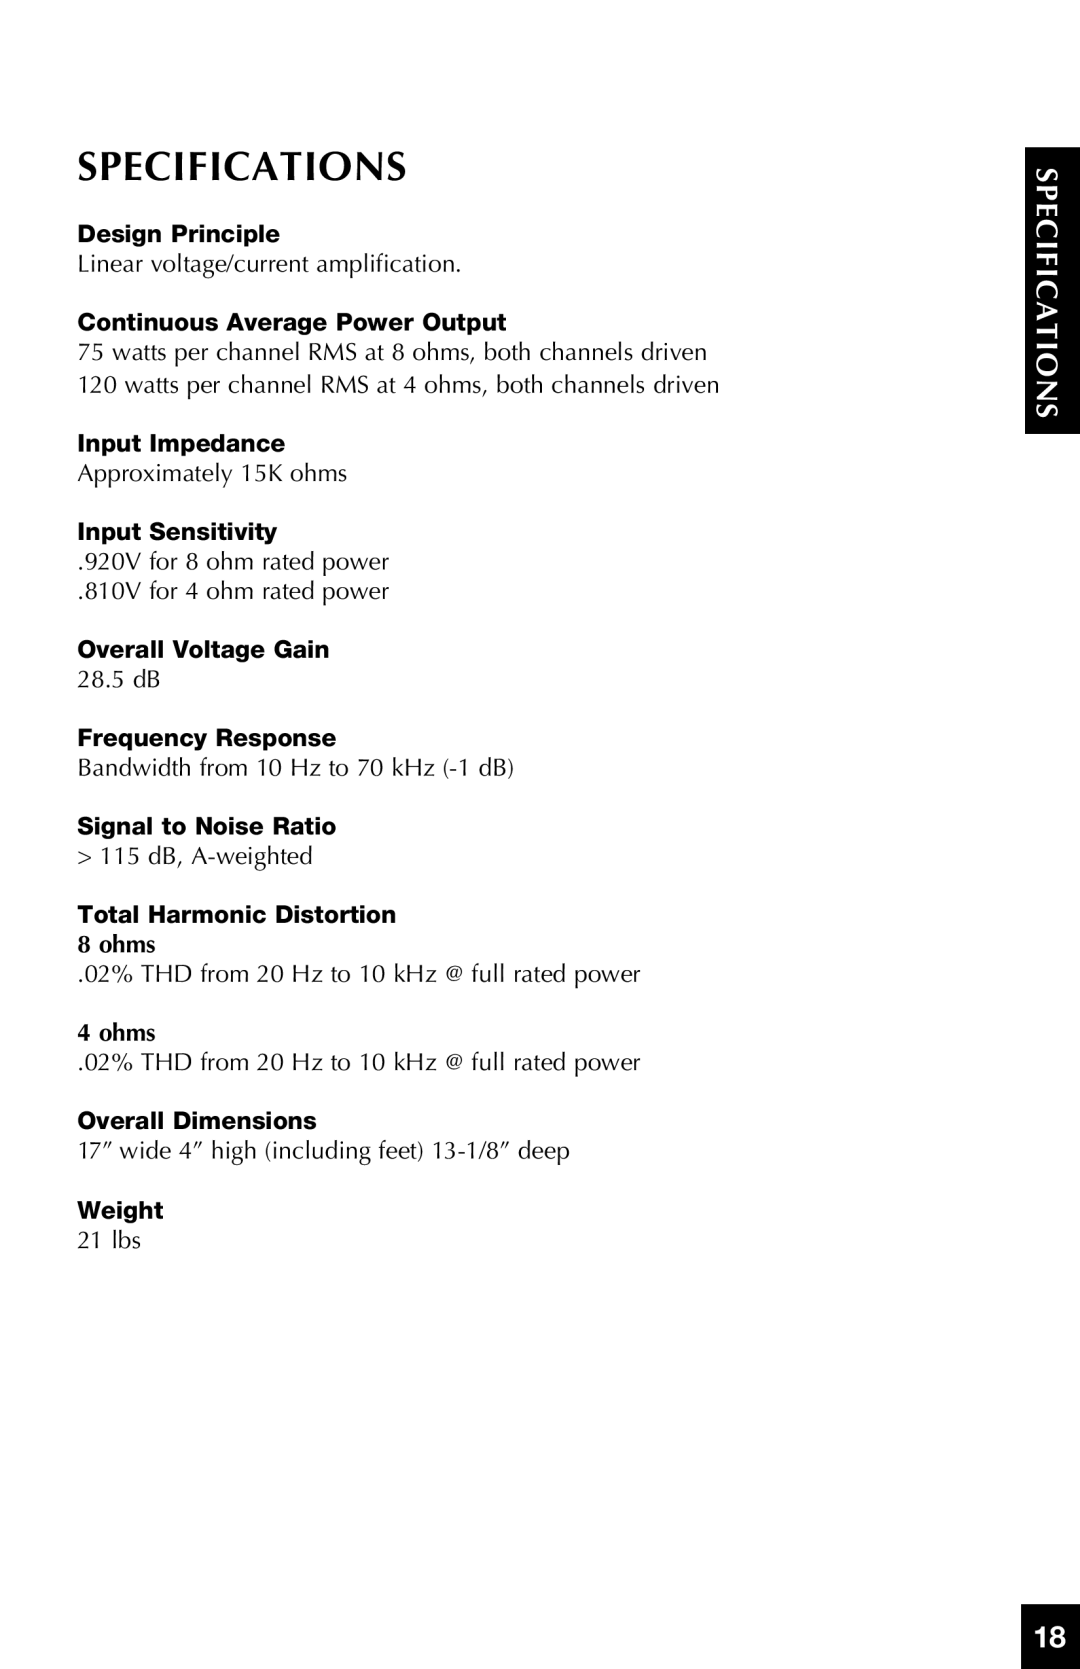 Niles Audio SI-275 manual Specifications, c ificeations Sp 